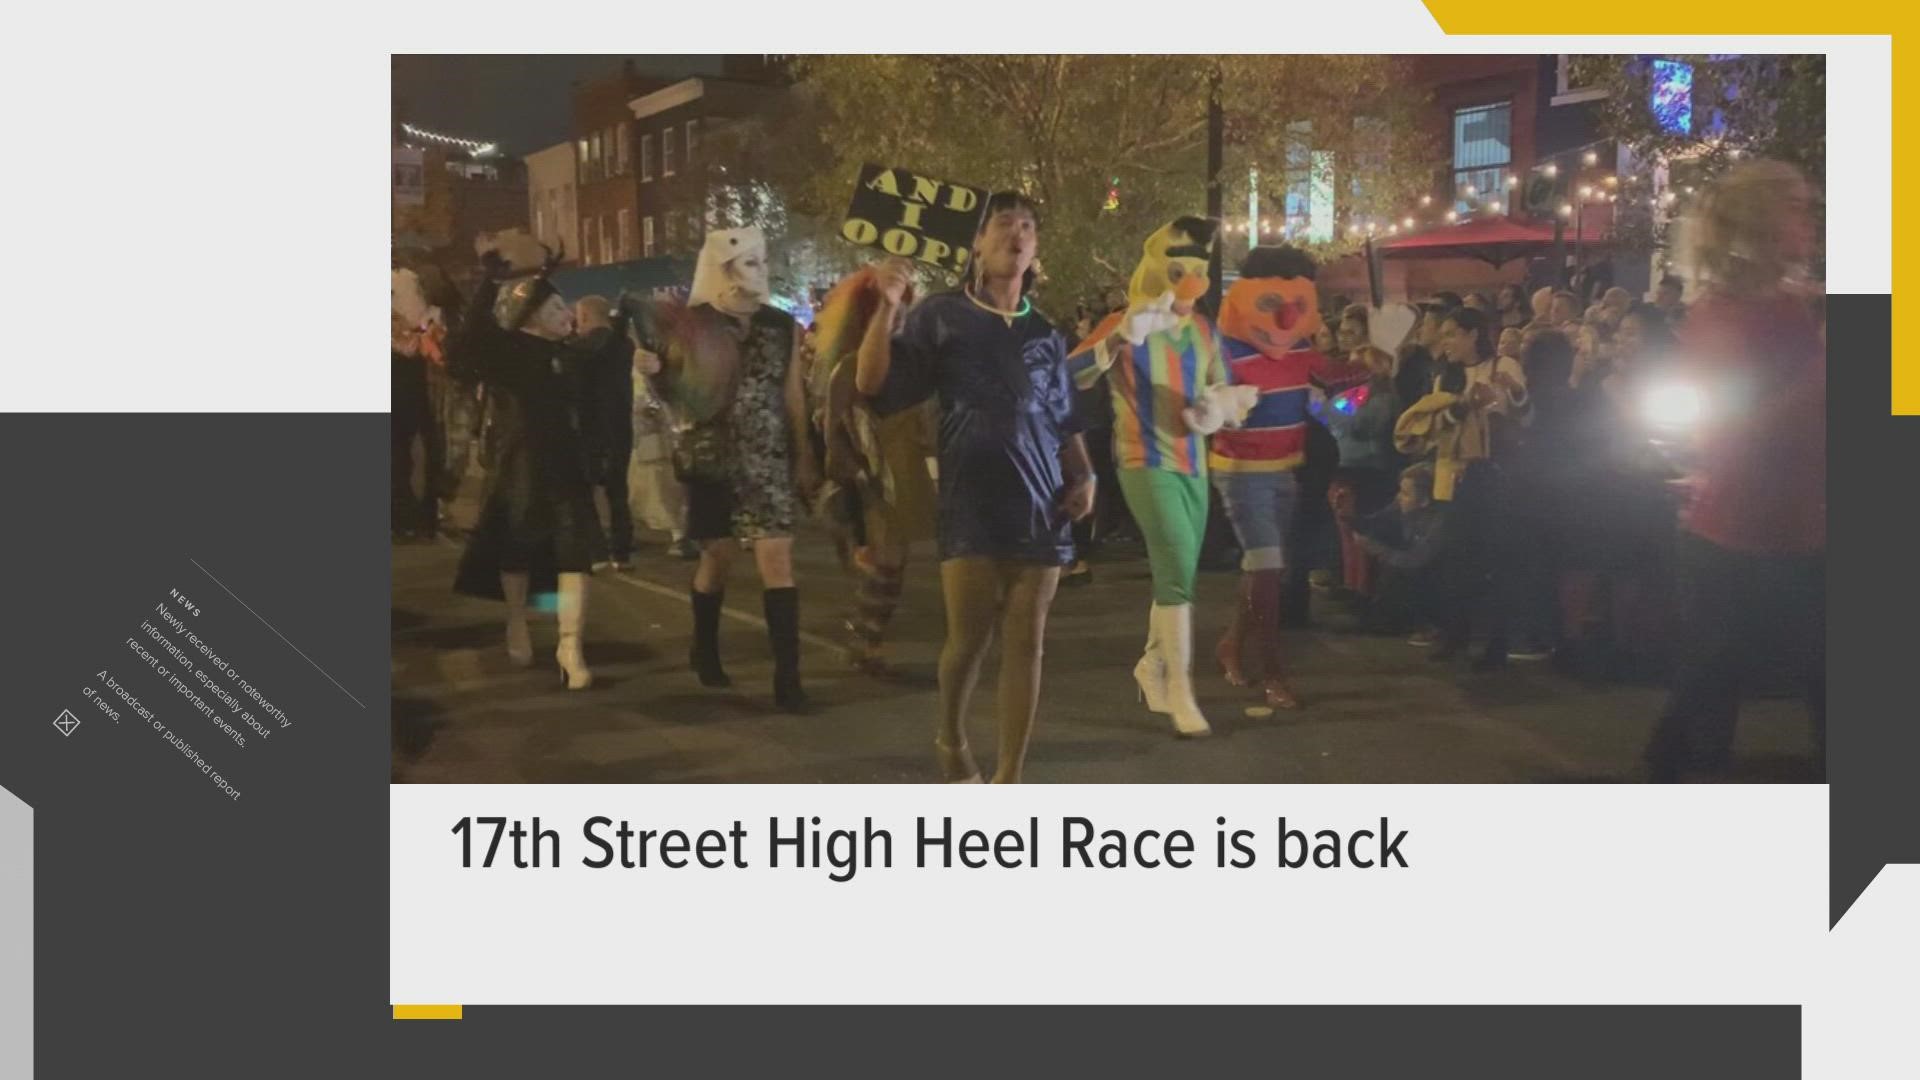 DC's 17th Street High Heel Race returns and a Japanese princess loses royal status for marrying commoner. This is Open Mic.